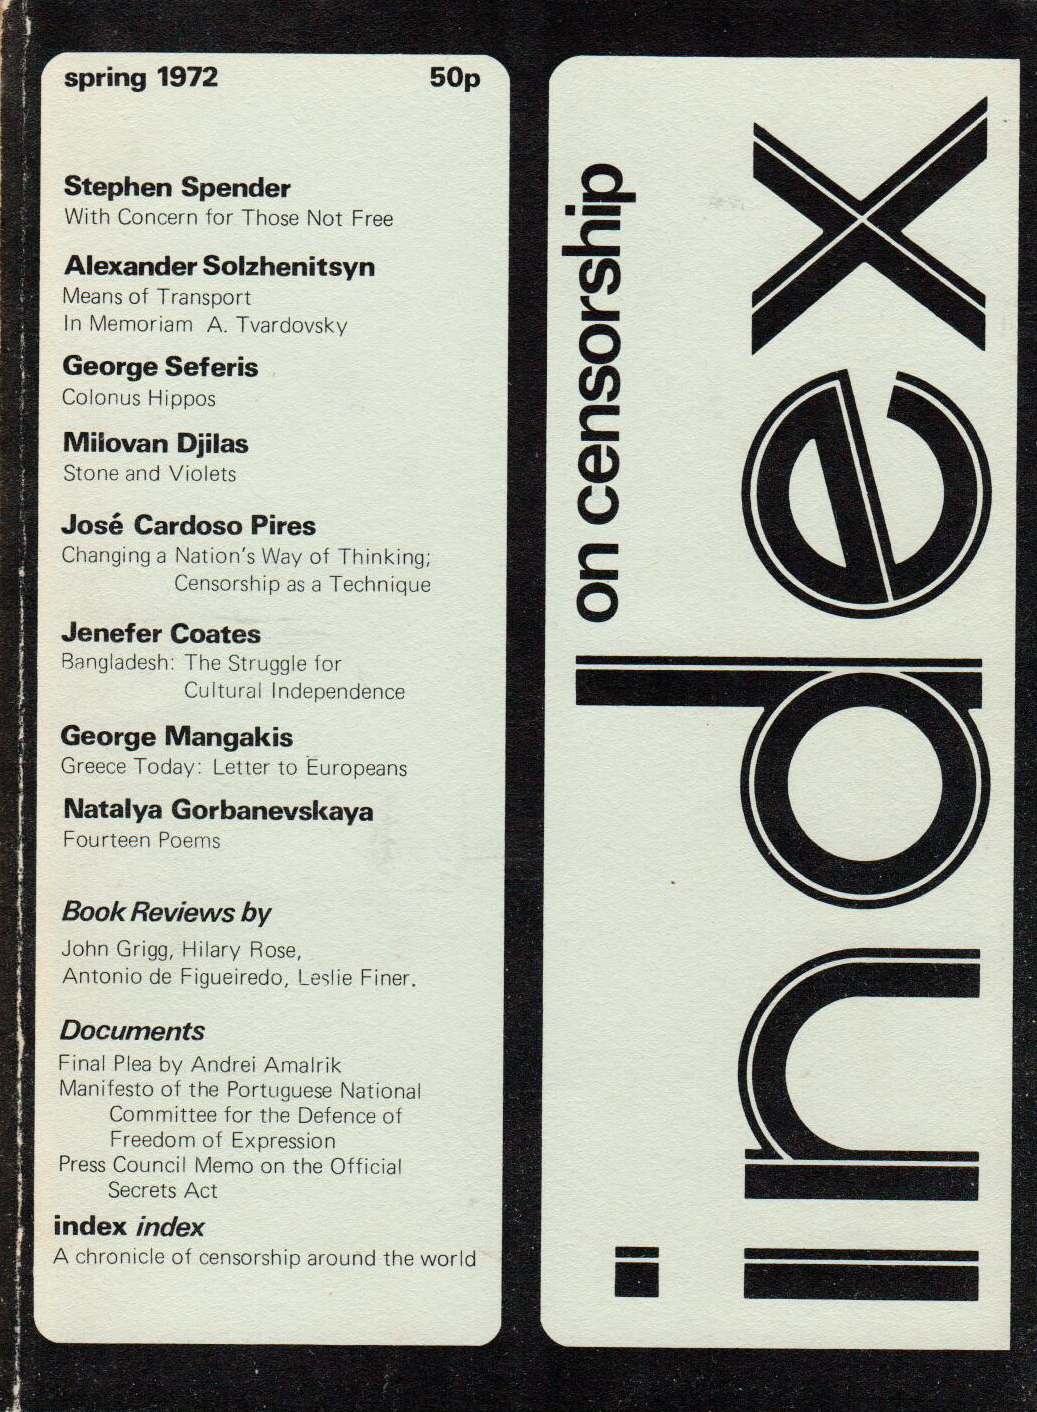 With concern for those not free, the Spring 1972 issue of Index on Censorship magazine